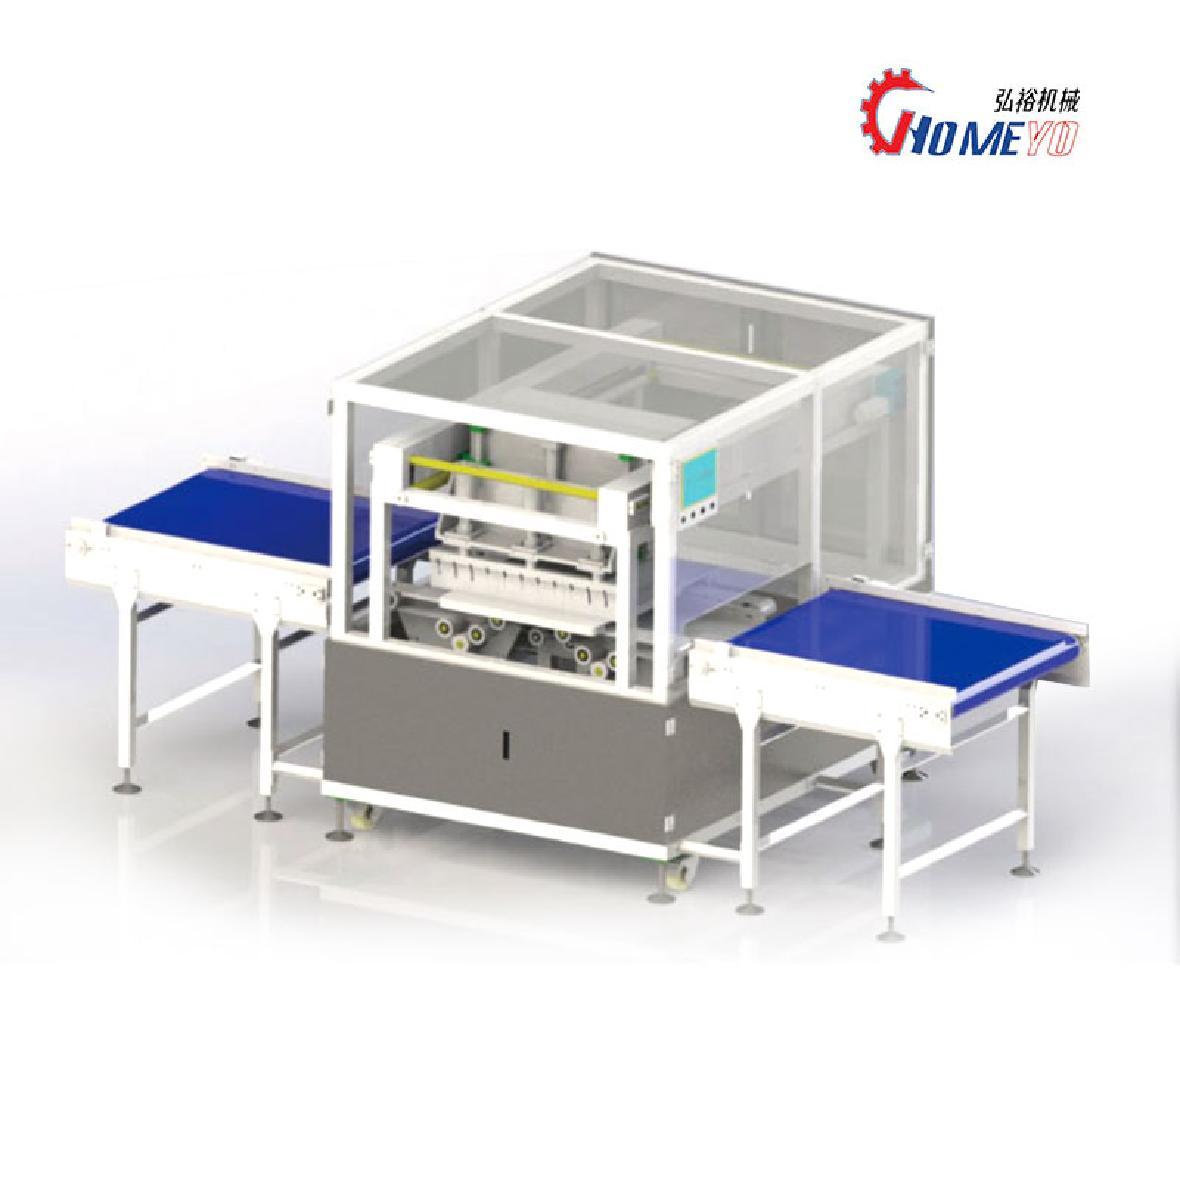 Ultrosonic Slicing Machine equipped with production line